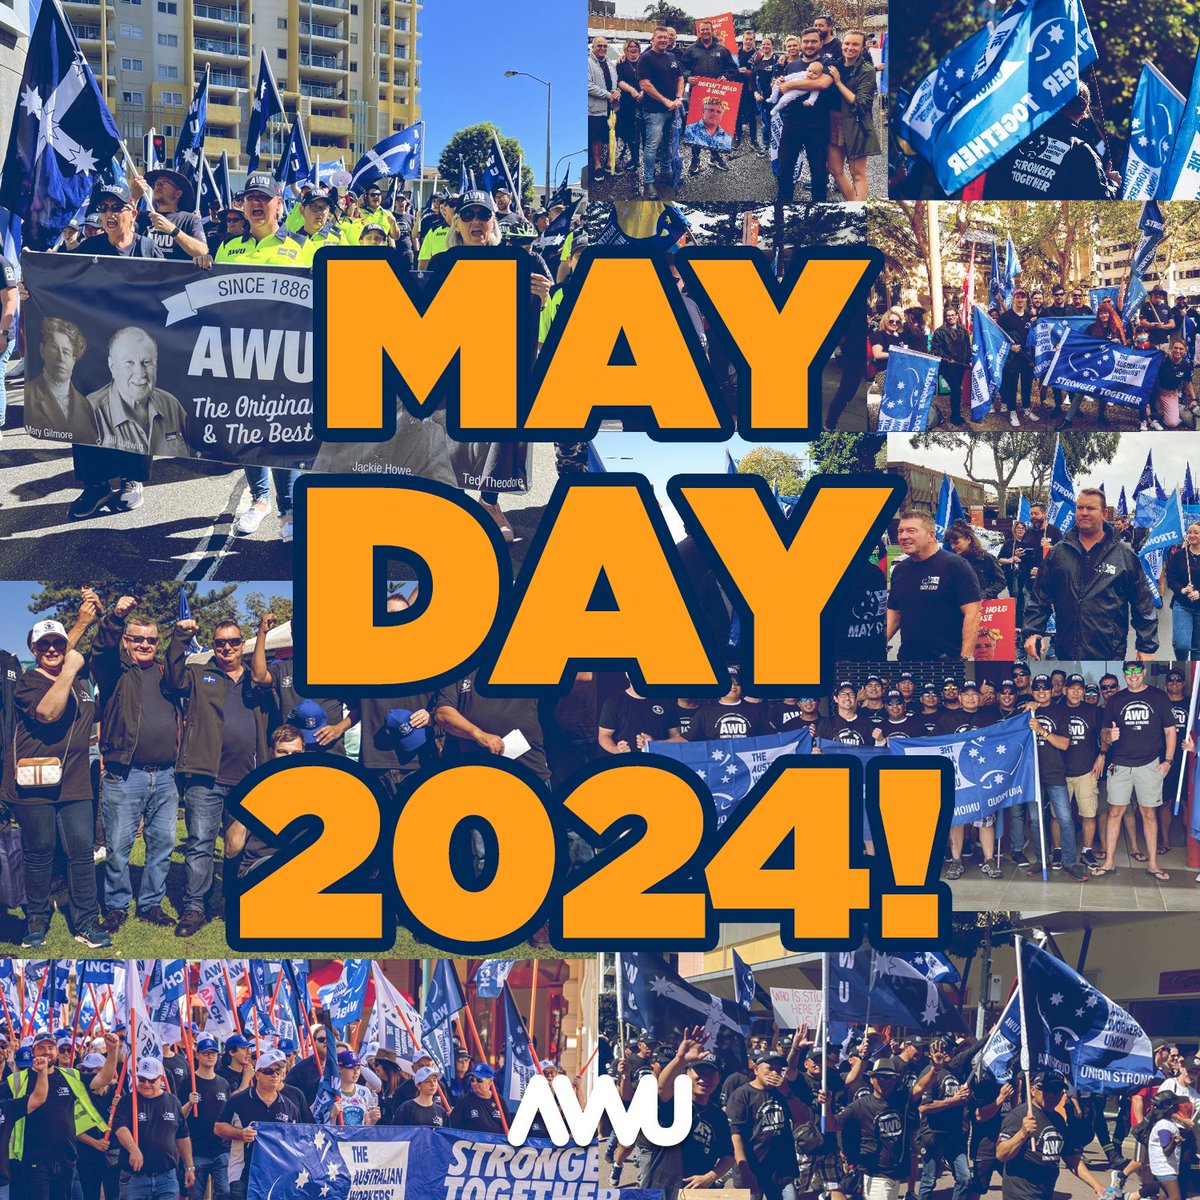 It's May Day! Today is International Workers' Day, to recognise the victories of the global labour movement. This weekend, our WA and QLD branches will be holding rallies to celebrate May Day and Labour Day! RSVP at QLD: loom.ly/0IysqYk WA: loom.ly/W8aSt-U #AWU